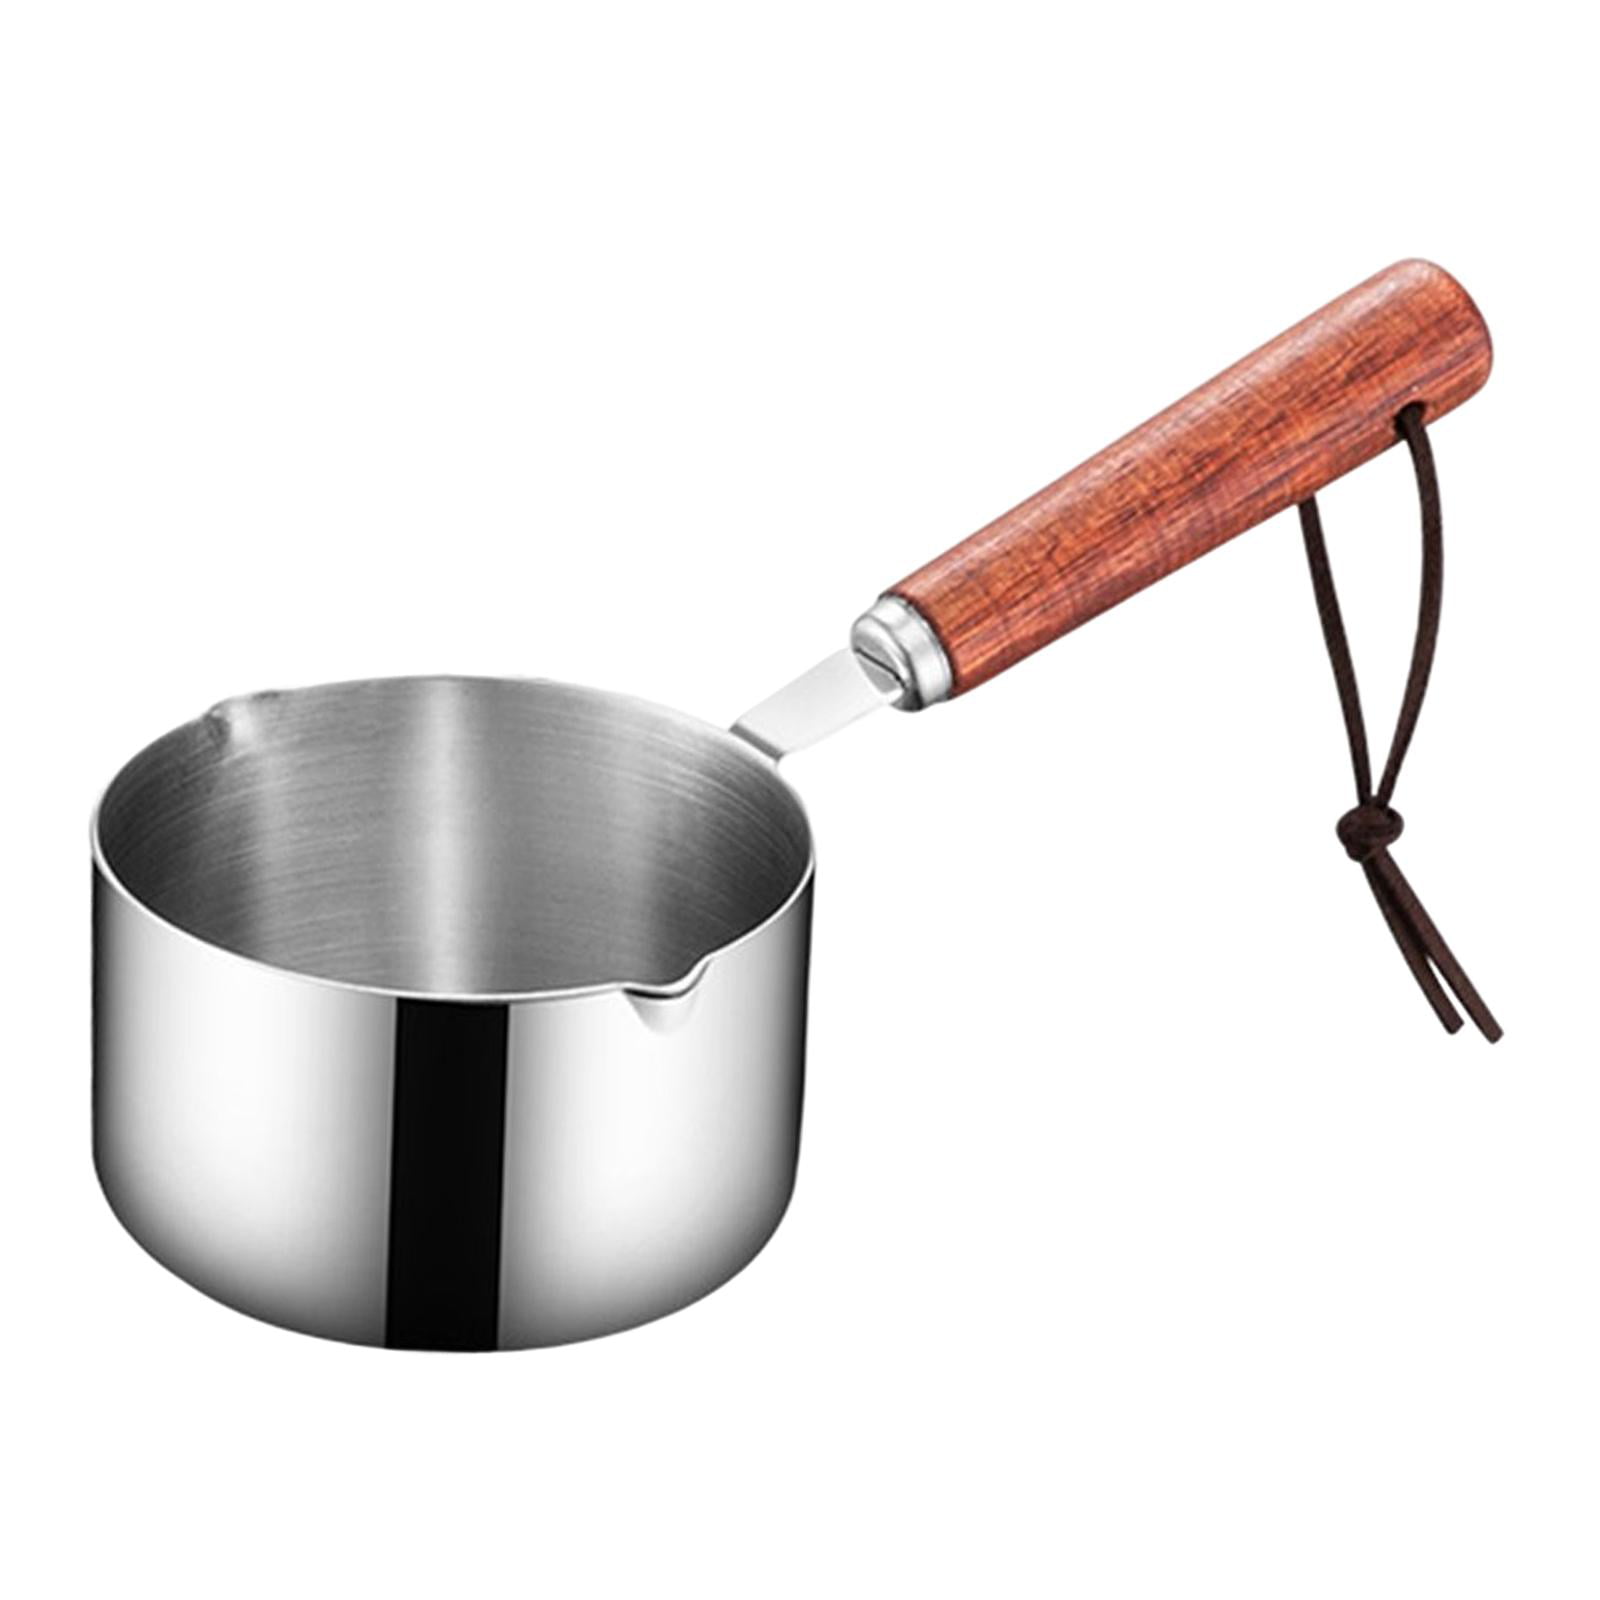 Authentic Small Stainless Steel Medium Size Galley Cooking Pot